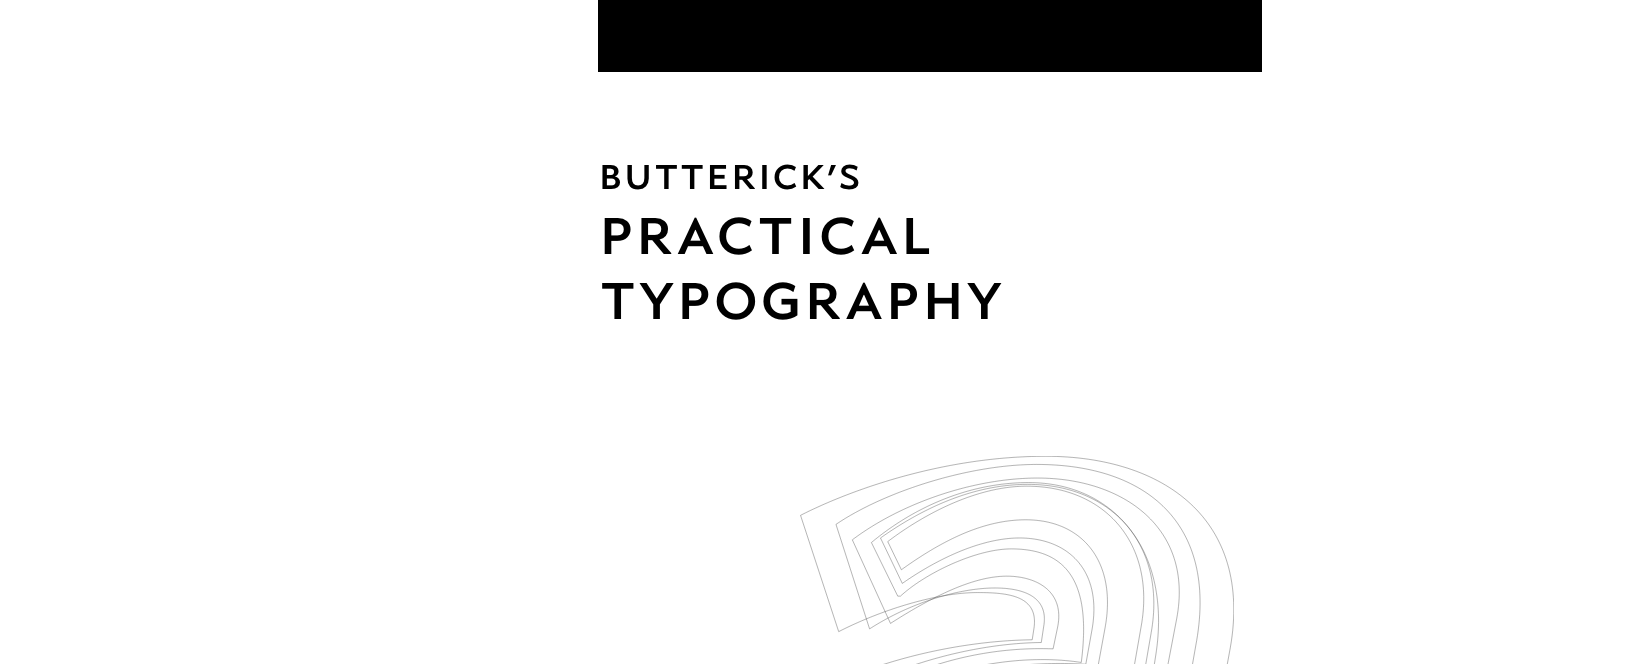 Butterick's Practical Typography